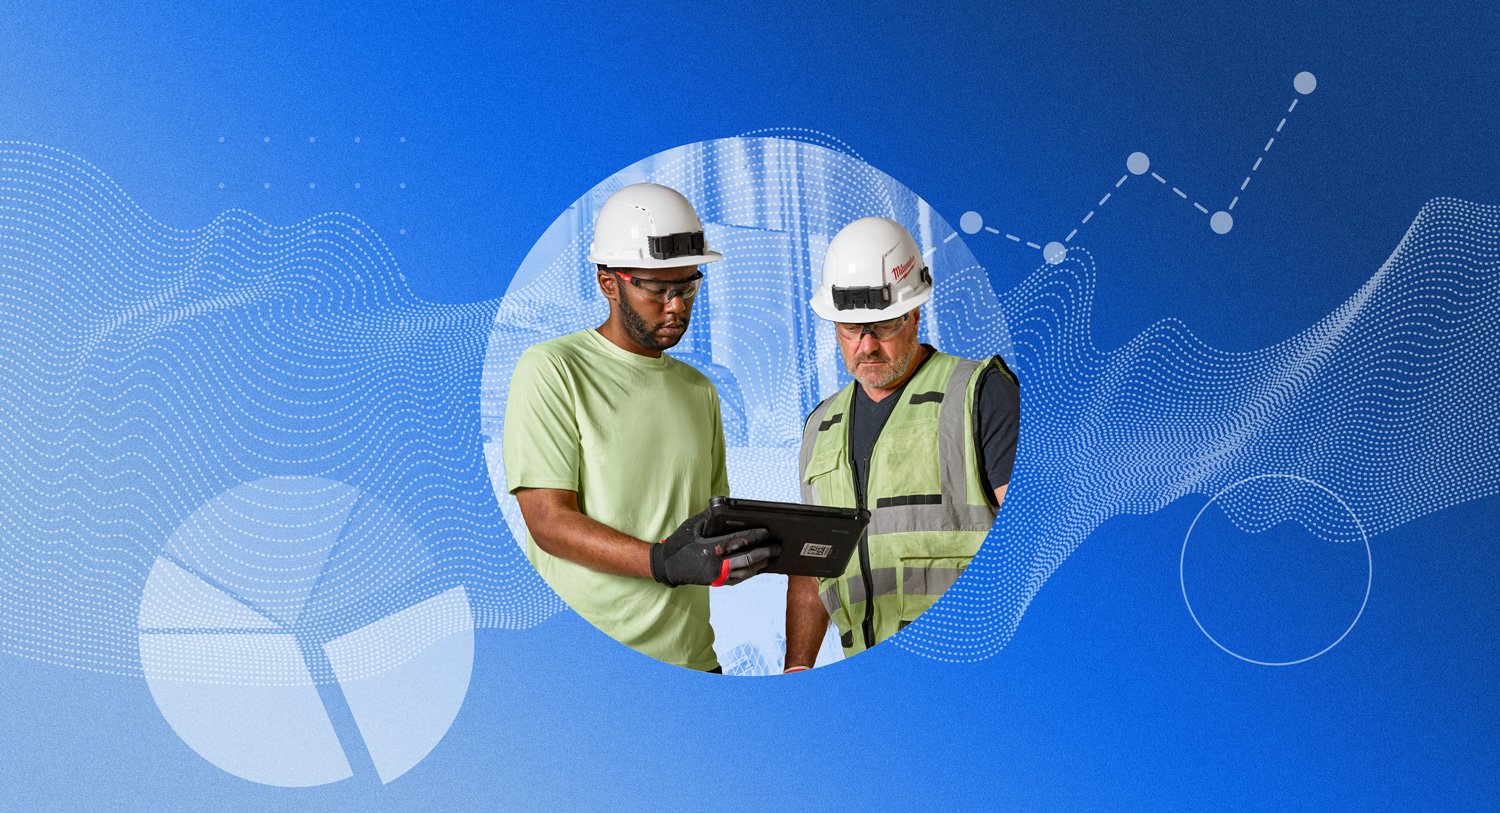 Construction Overhead graphic shows two workers looking at iPad with overlay of pie chart and other graphs